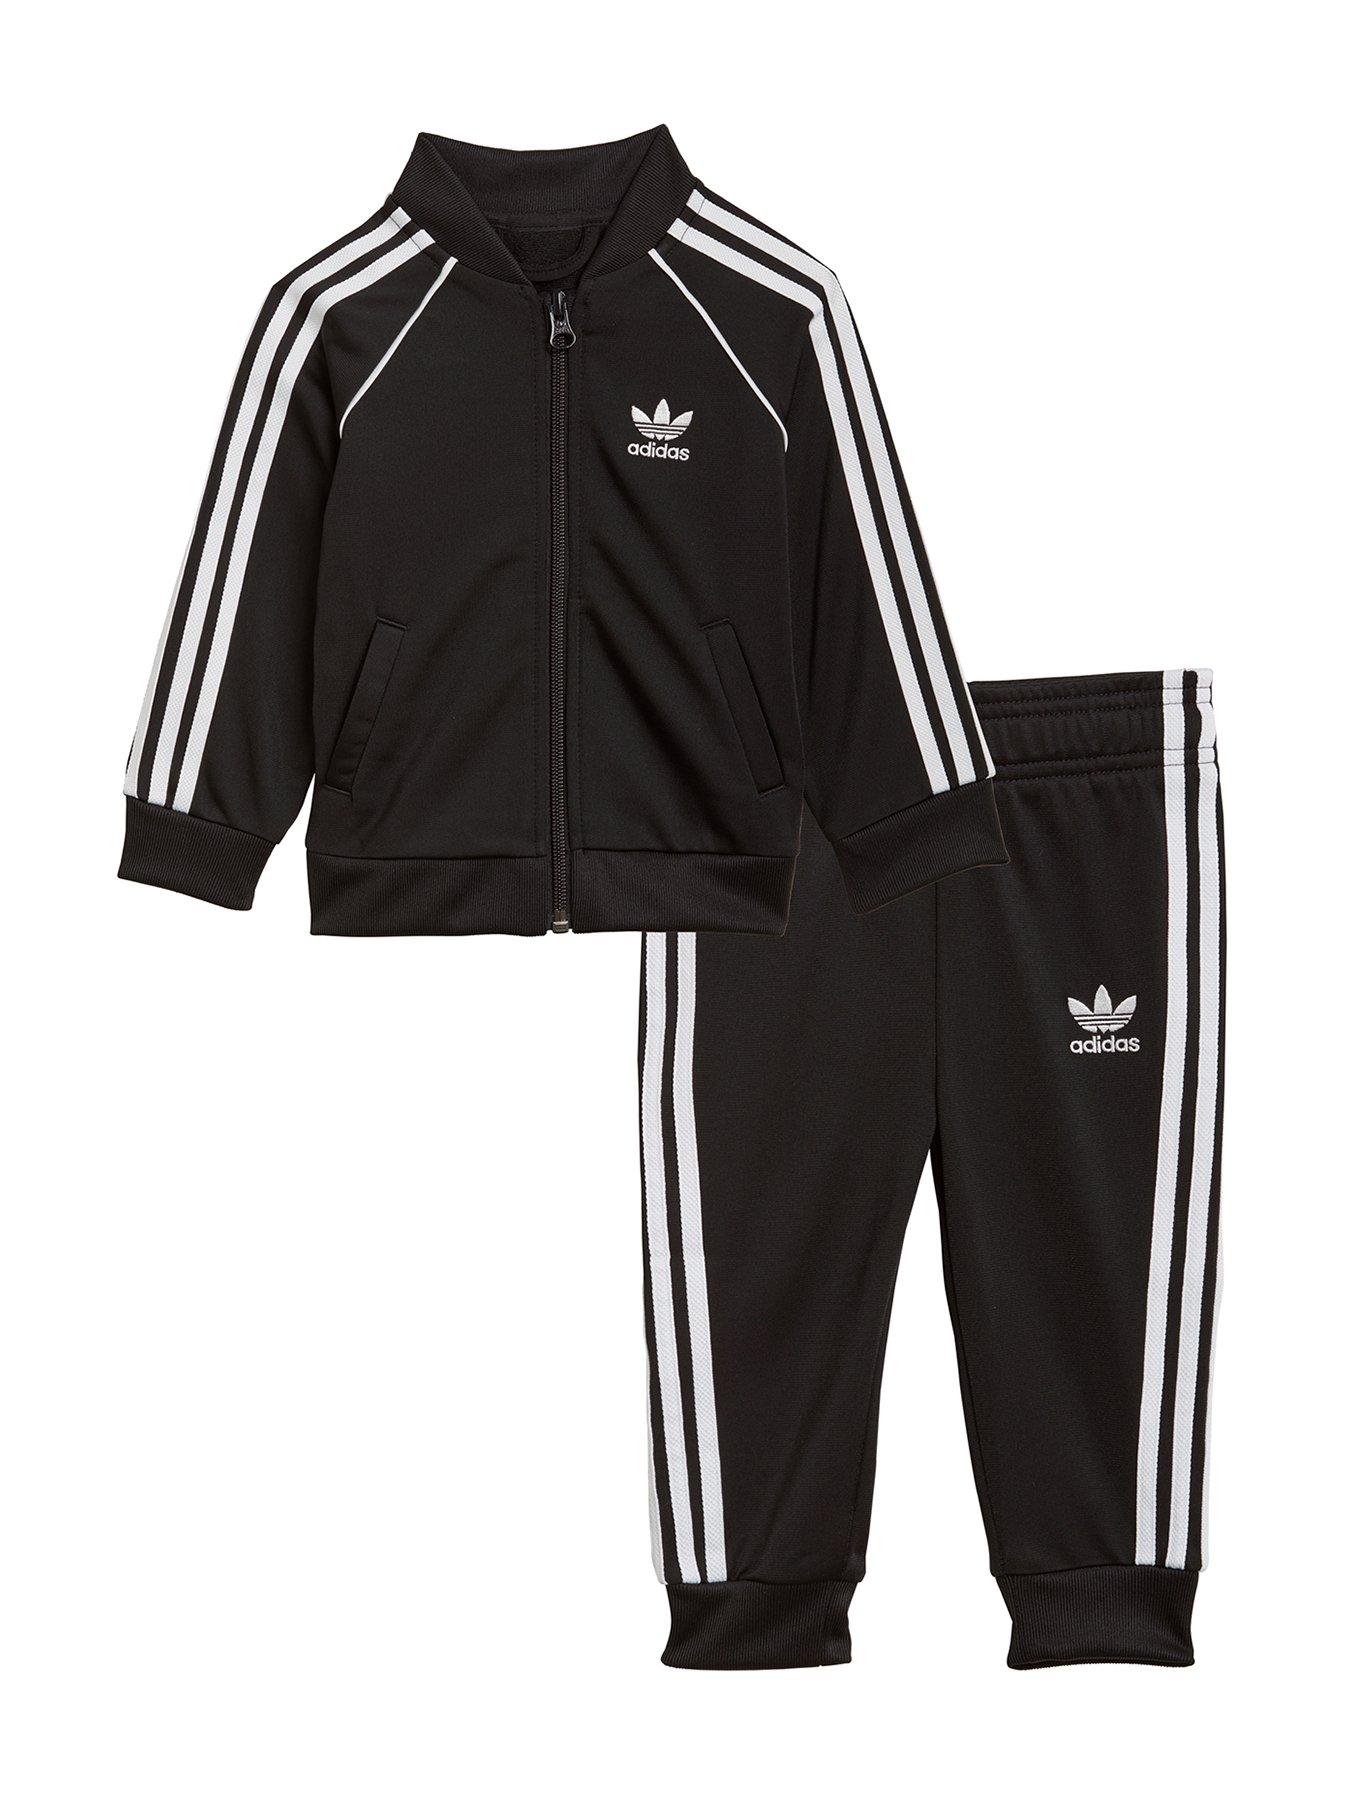 adidas tracksuit 18 months